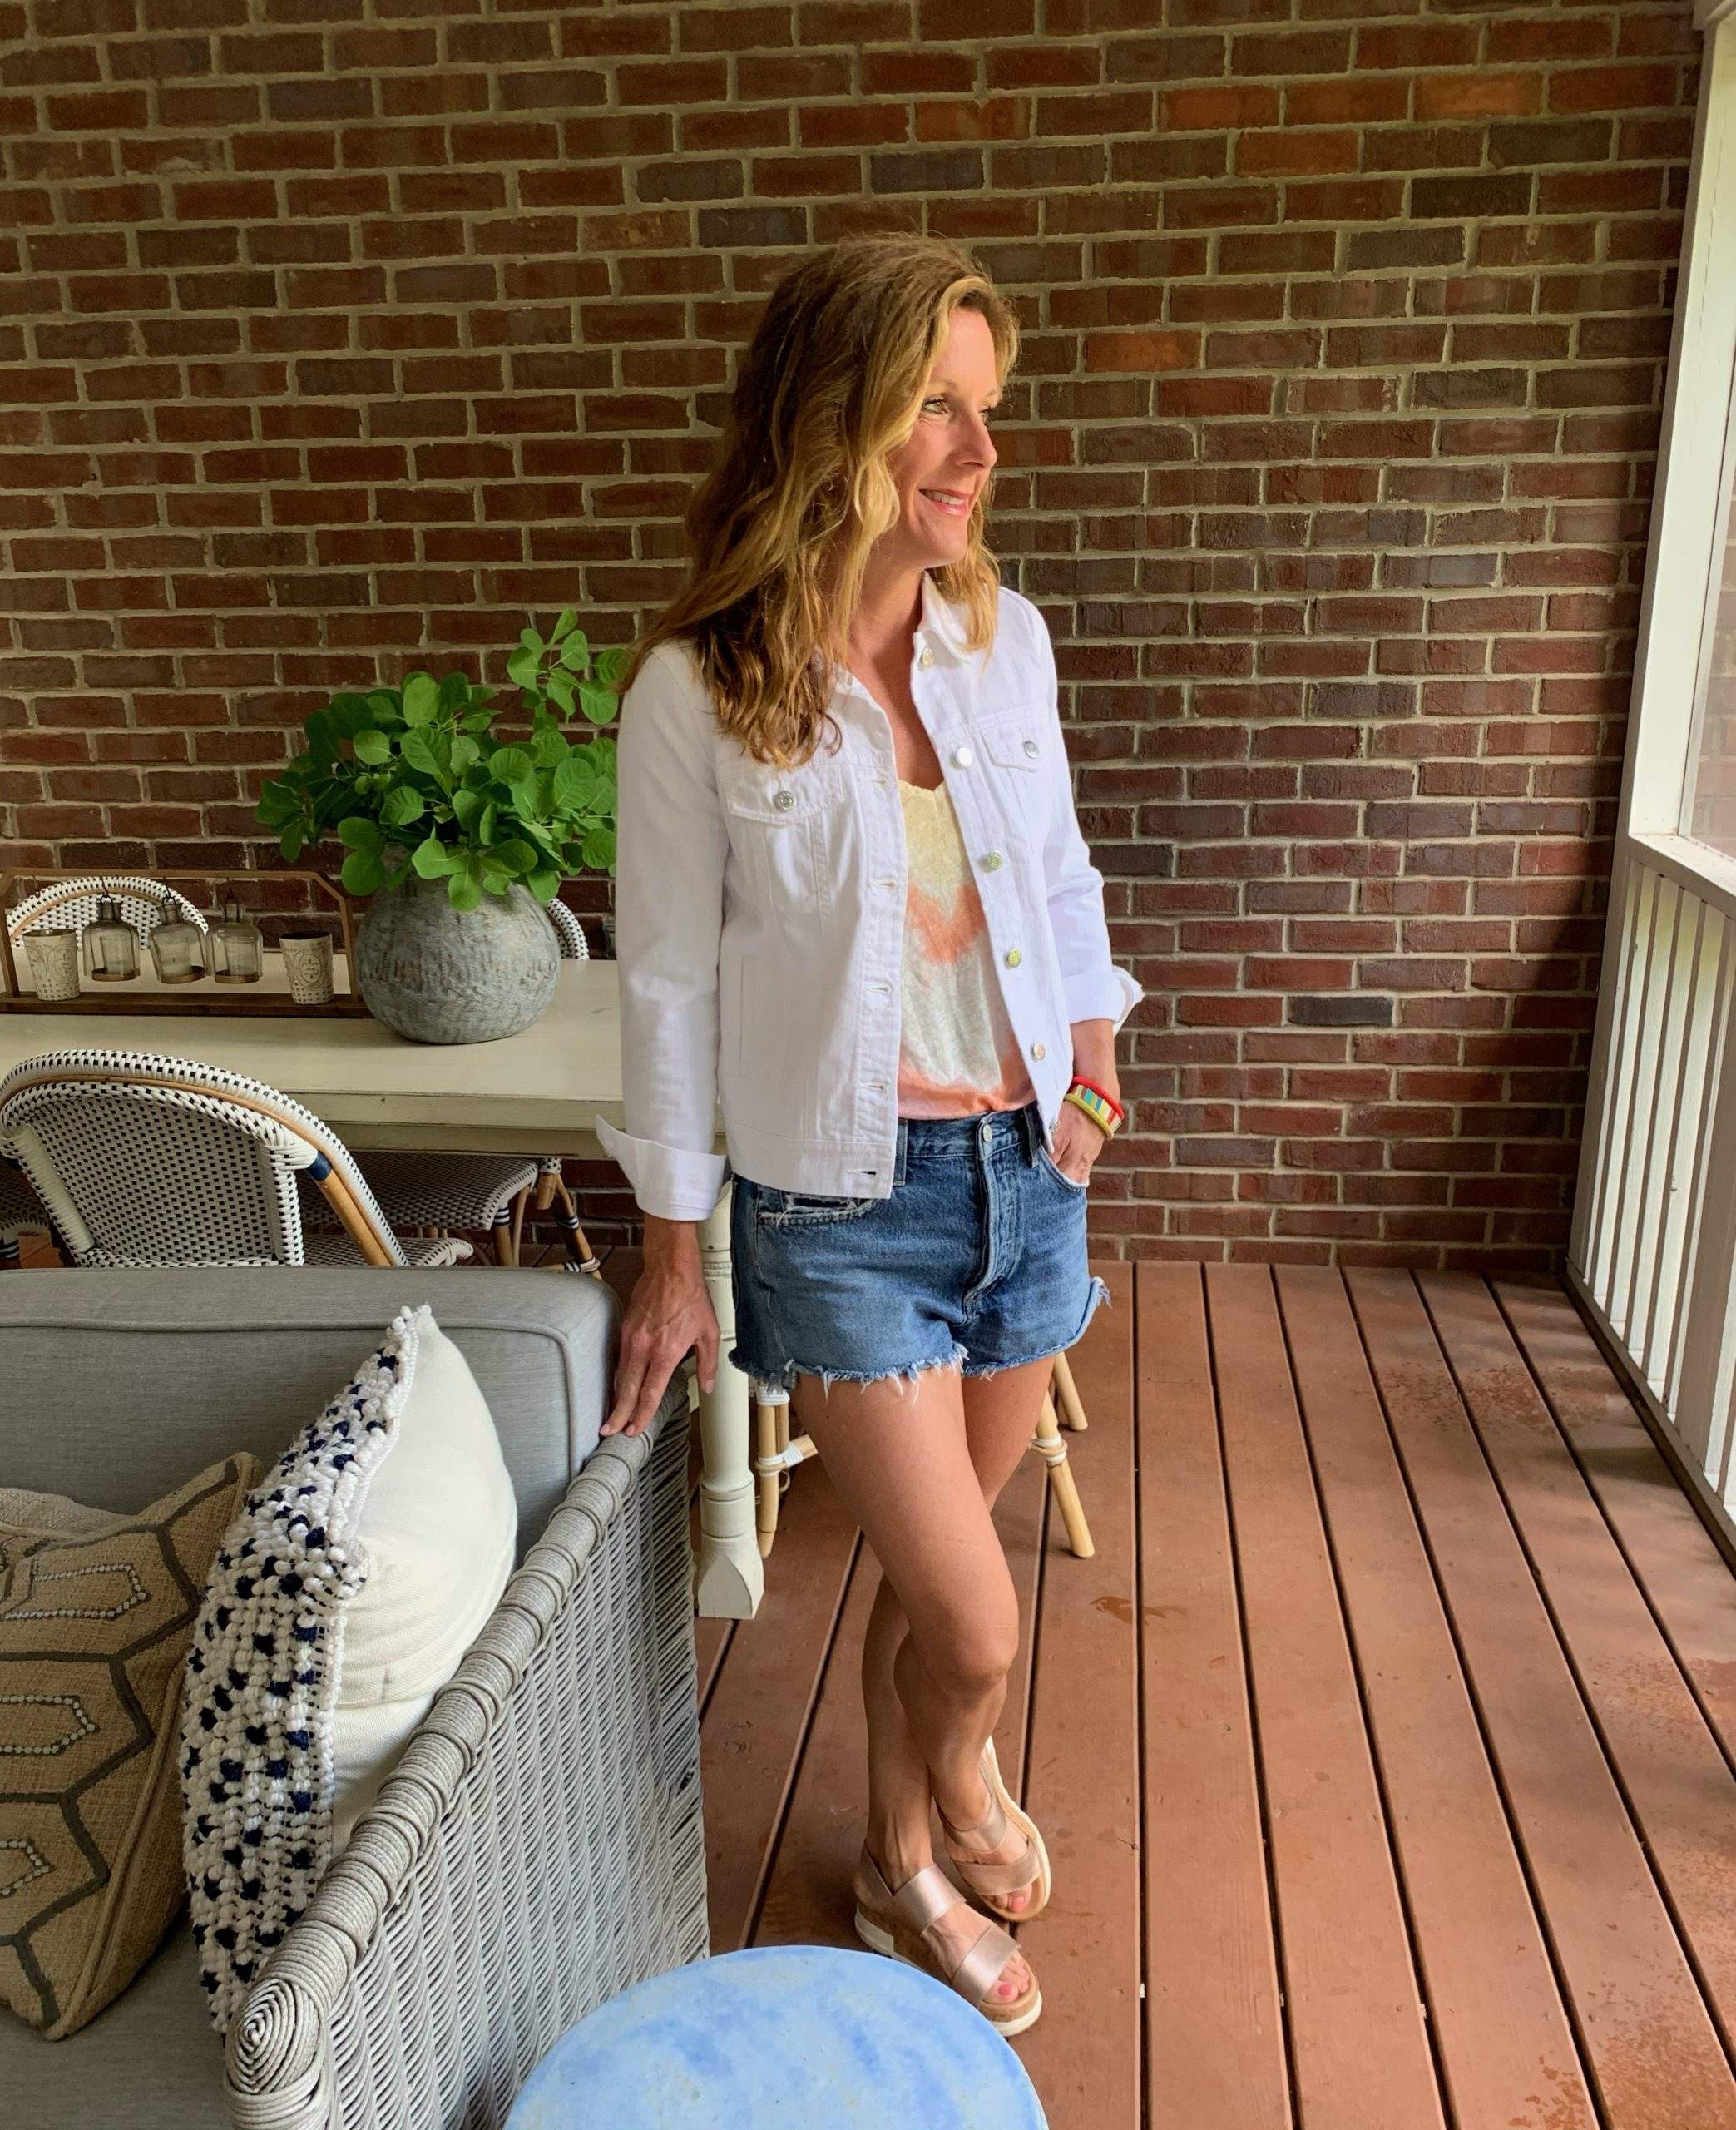 Styling a White Denim Jacket with Distressed Denim Shorts